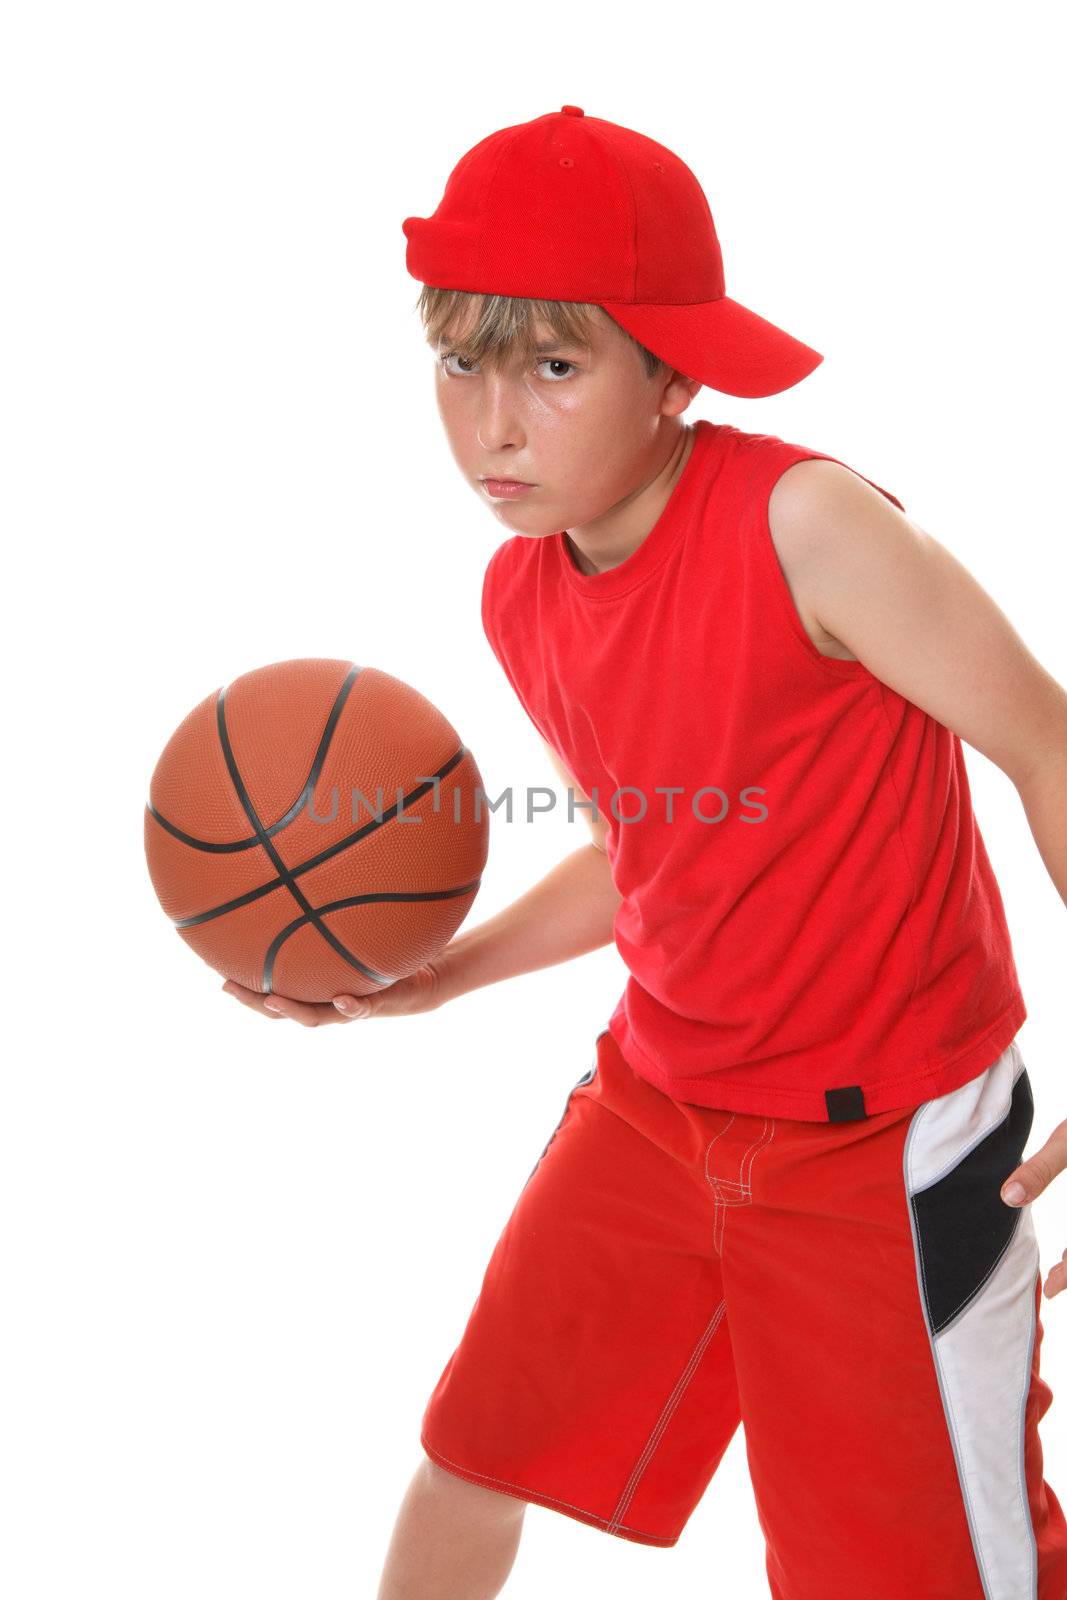 A boy playing with a basketball.